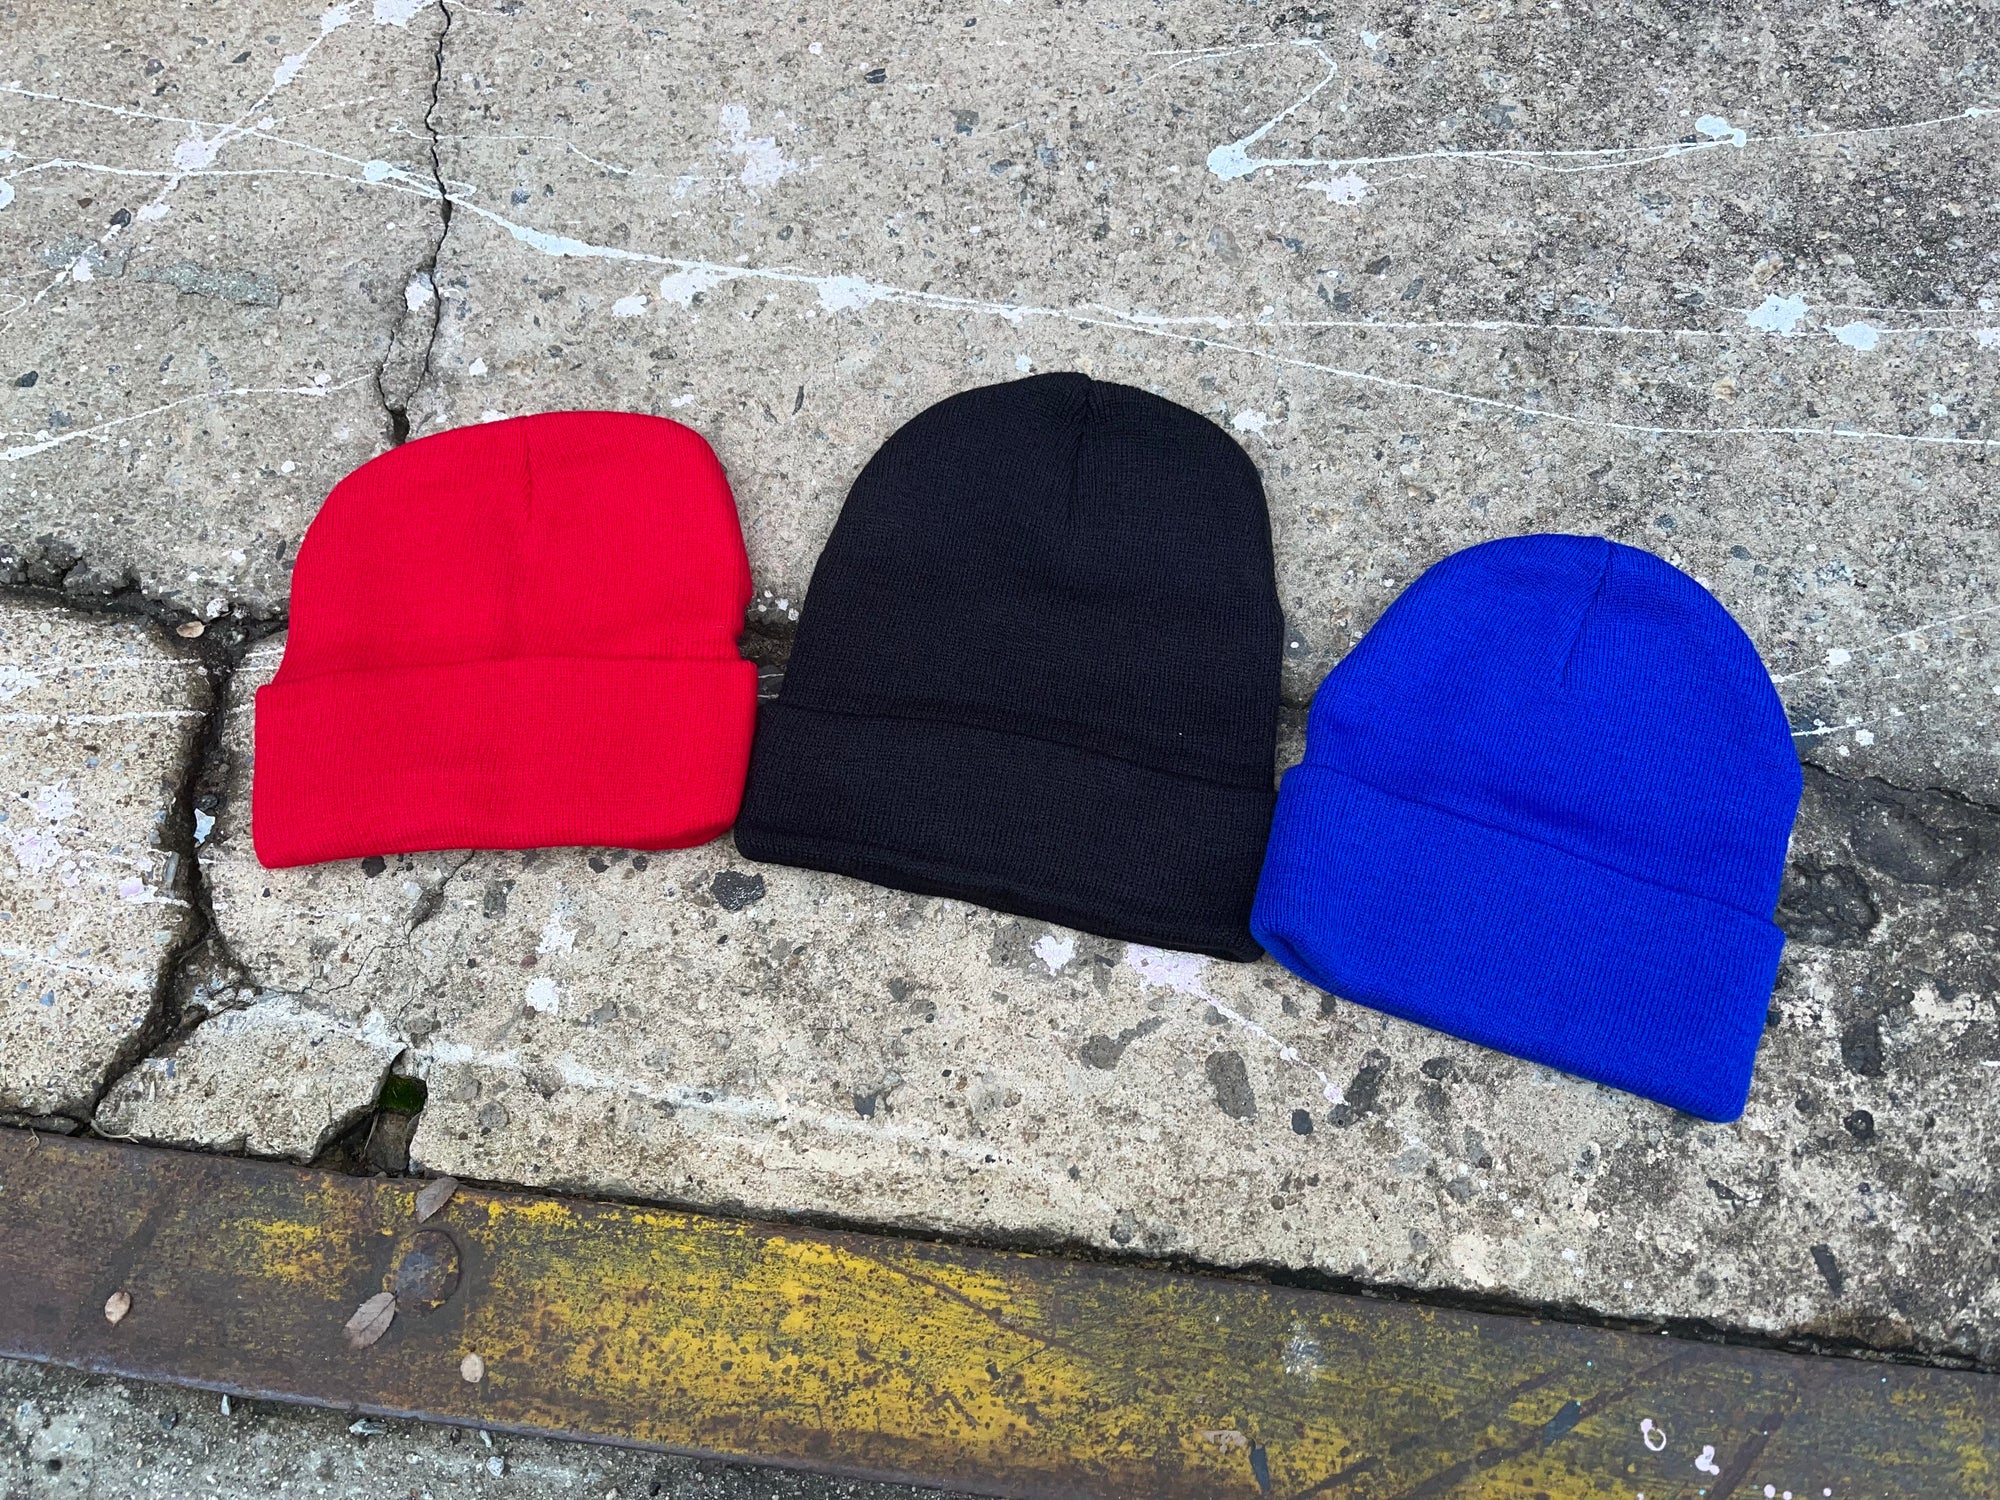 Red beanies